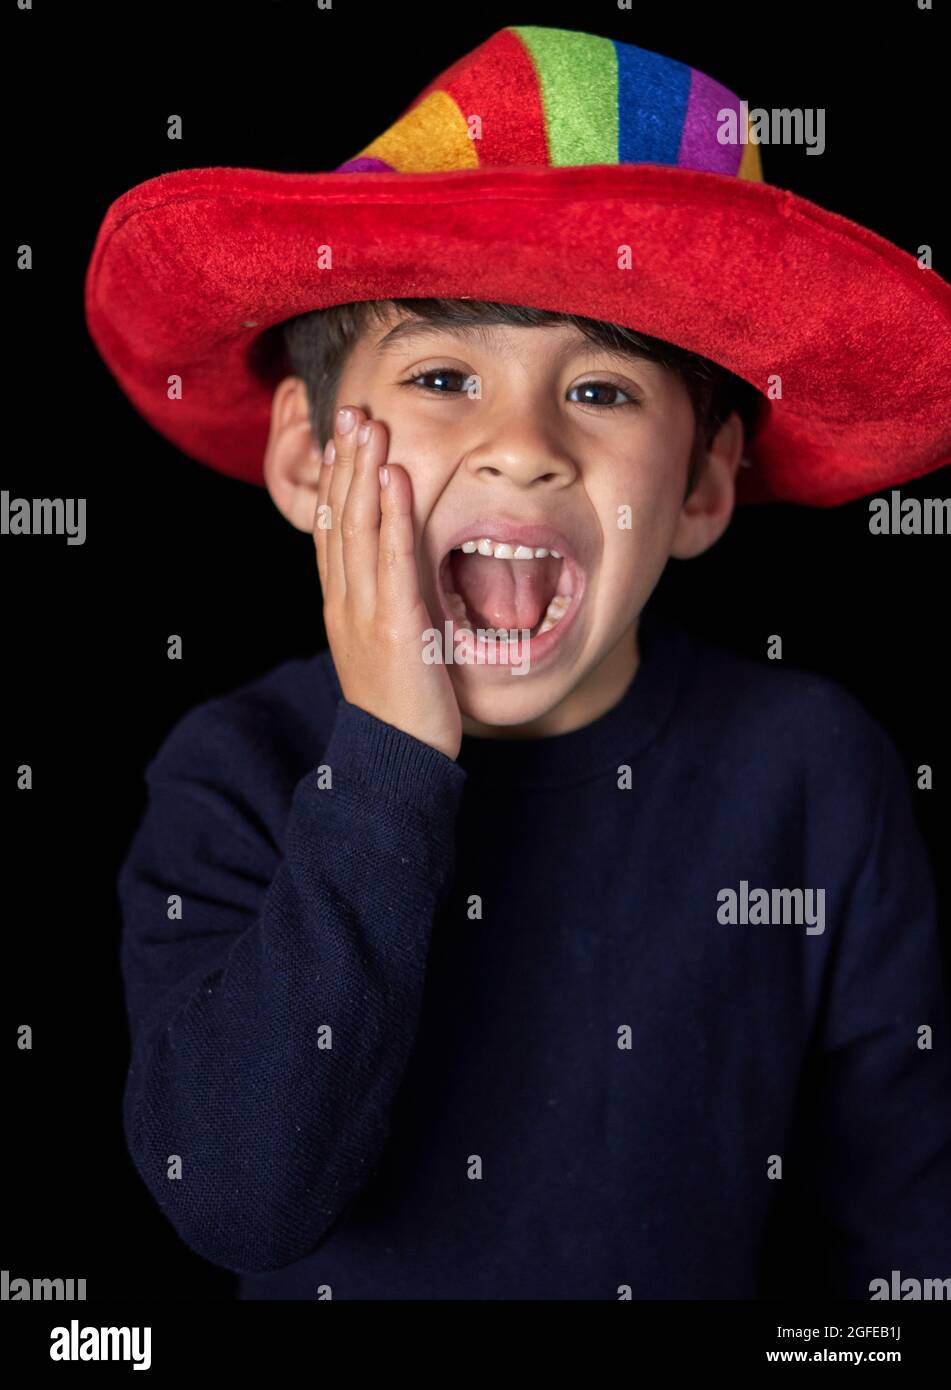 latino boy with red hat making faces and leaning his hand on his face shouting. vertical, black background Stock Photo